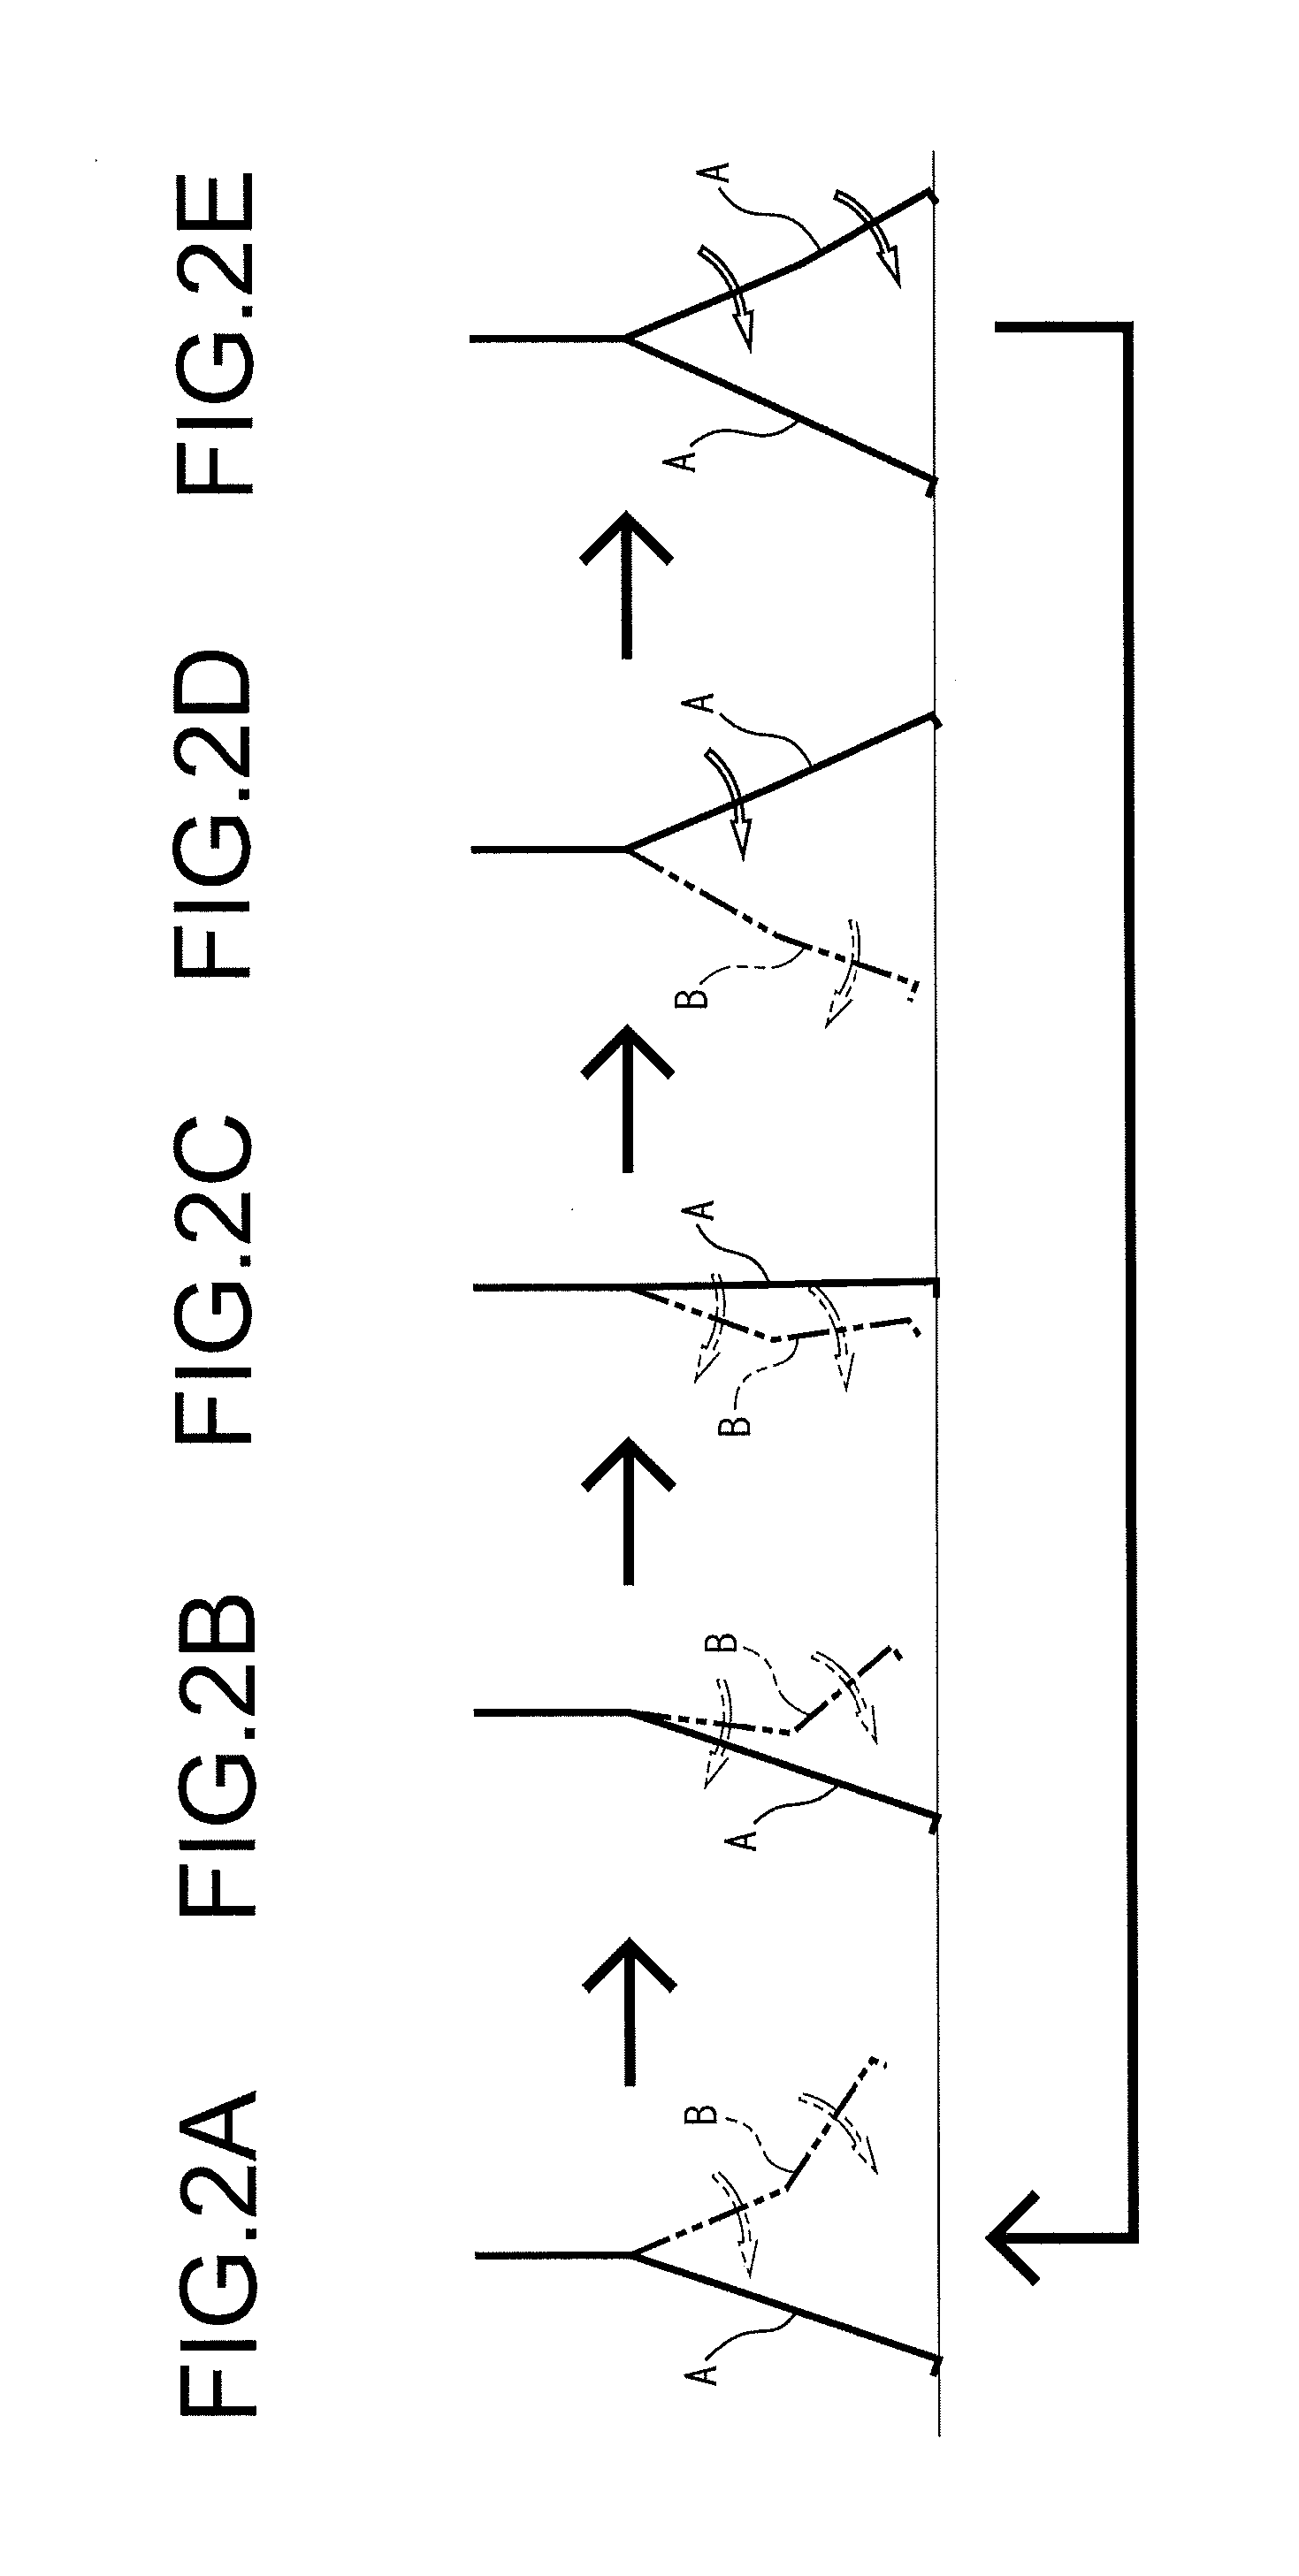 Swinging leg pendulum movement aid for walking, and assistance force control method